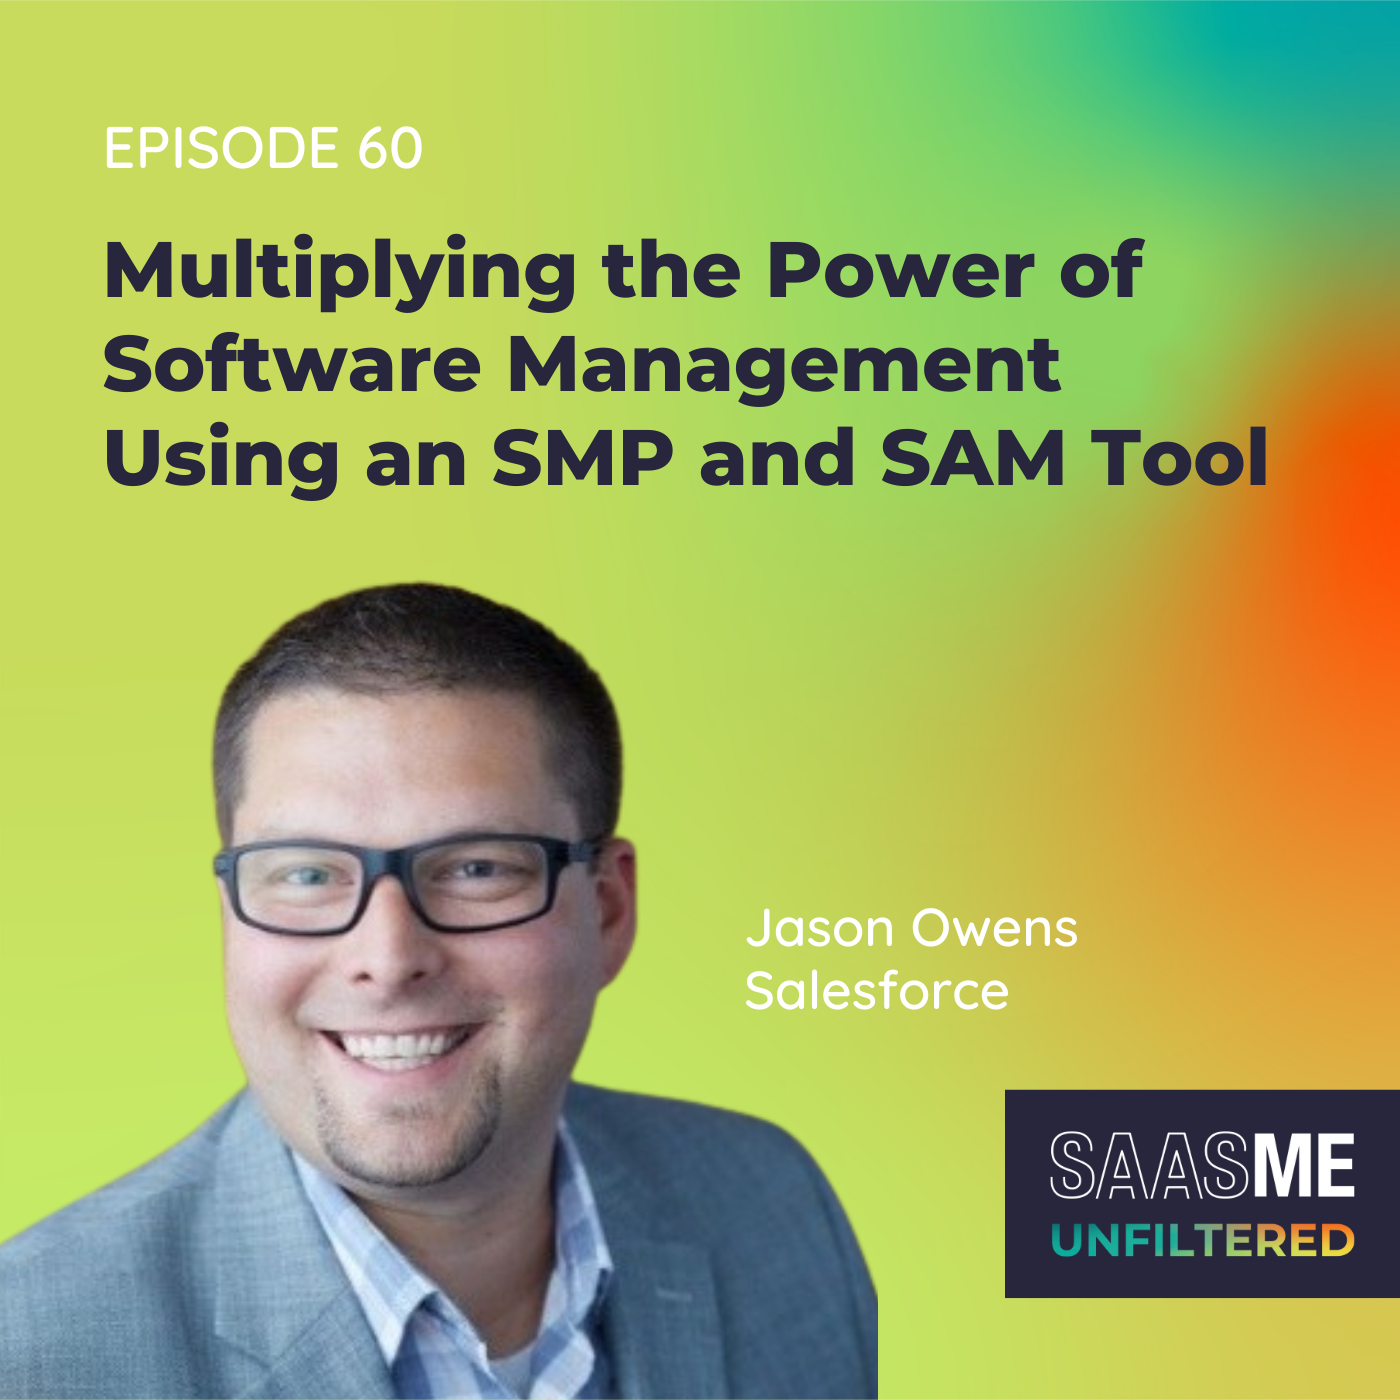 Multiplying the Power of Software Management Using an SMP and SAM Tool with Jason Owens (Salesforce)